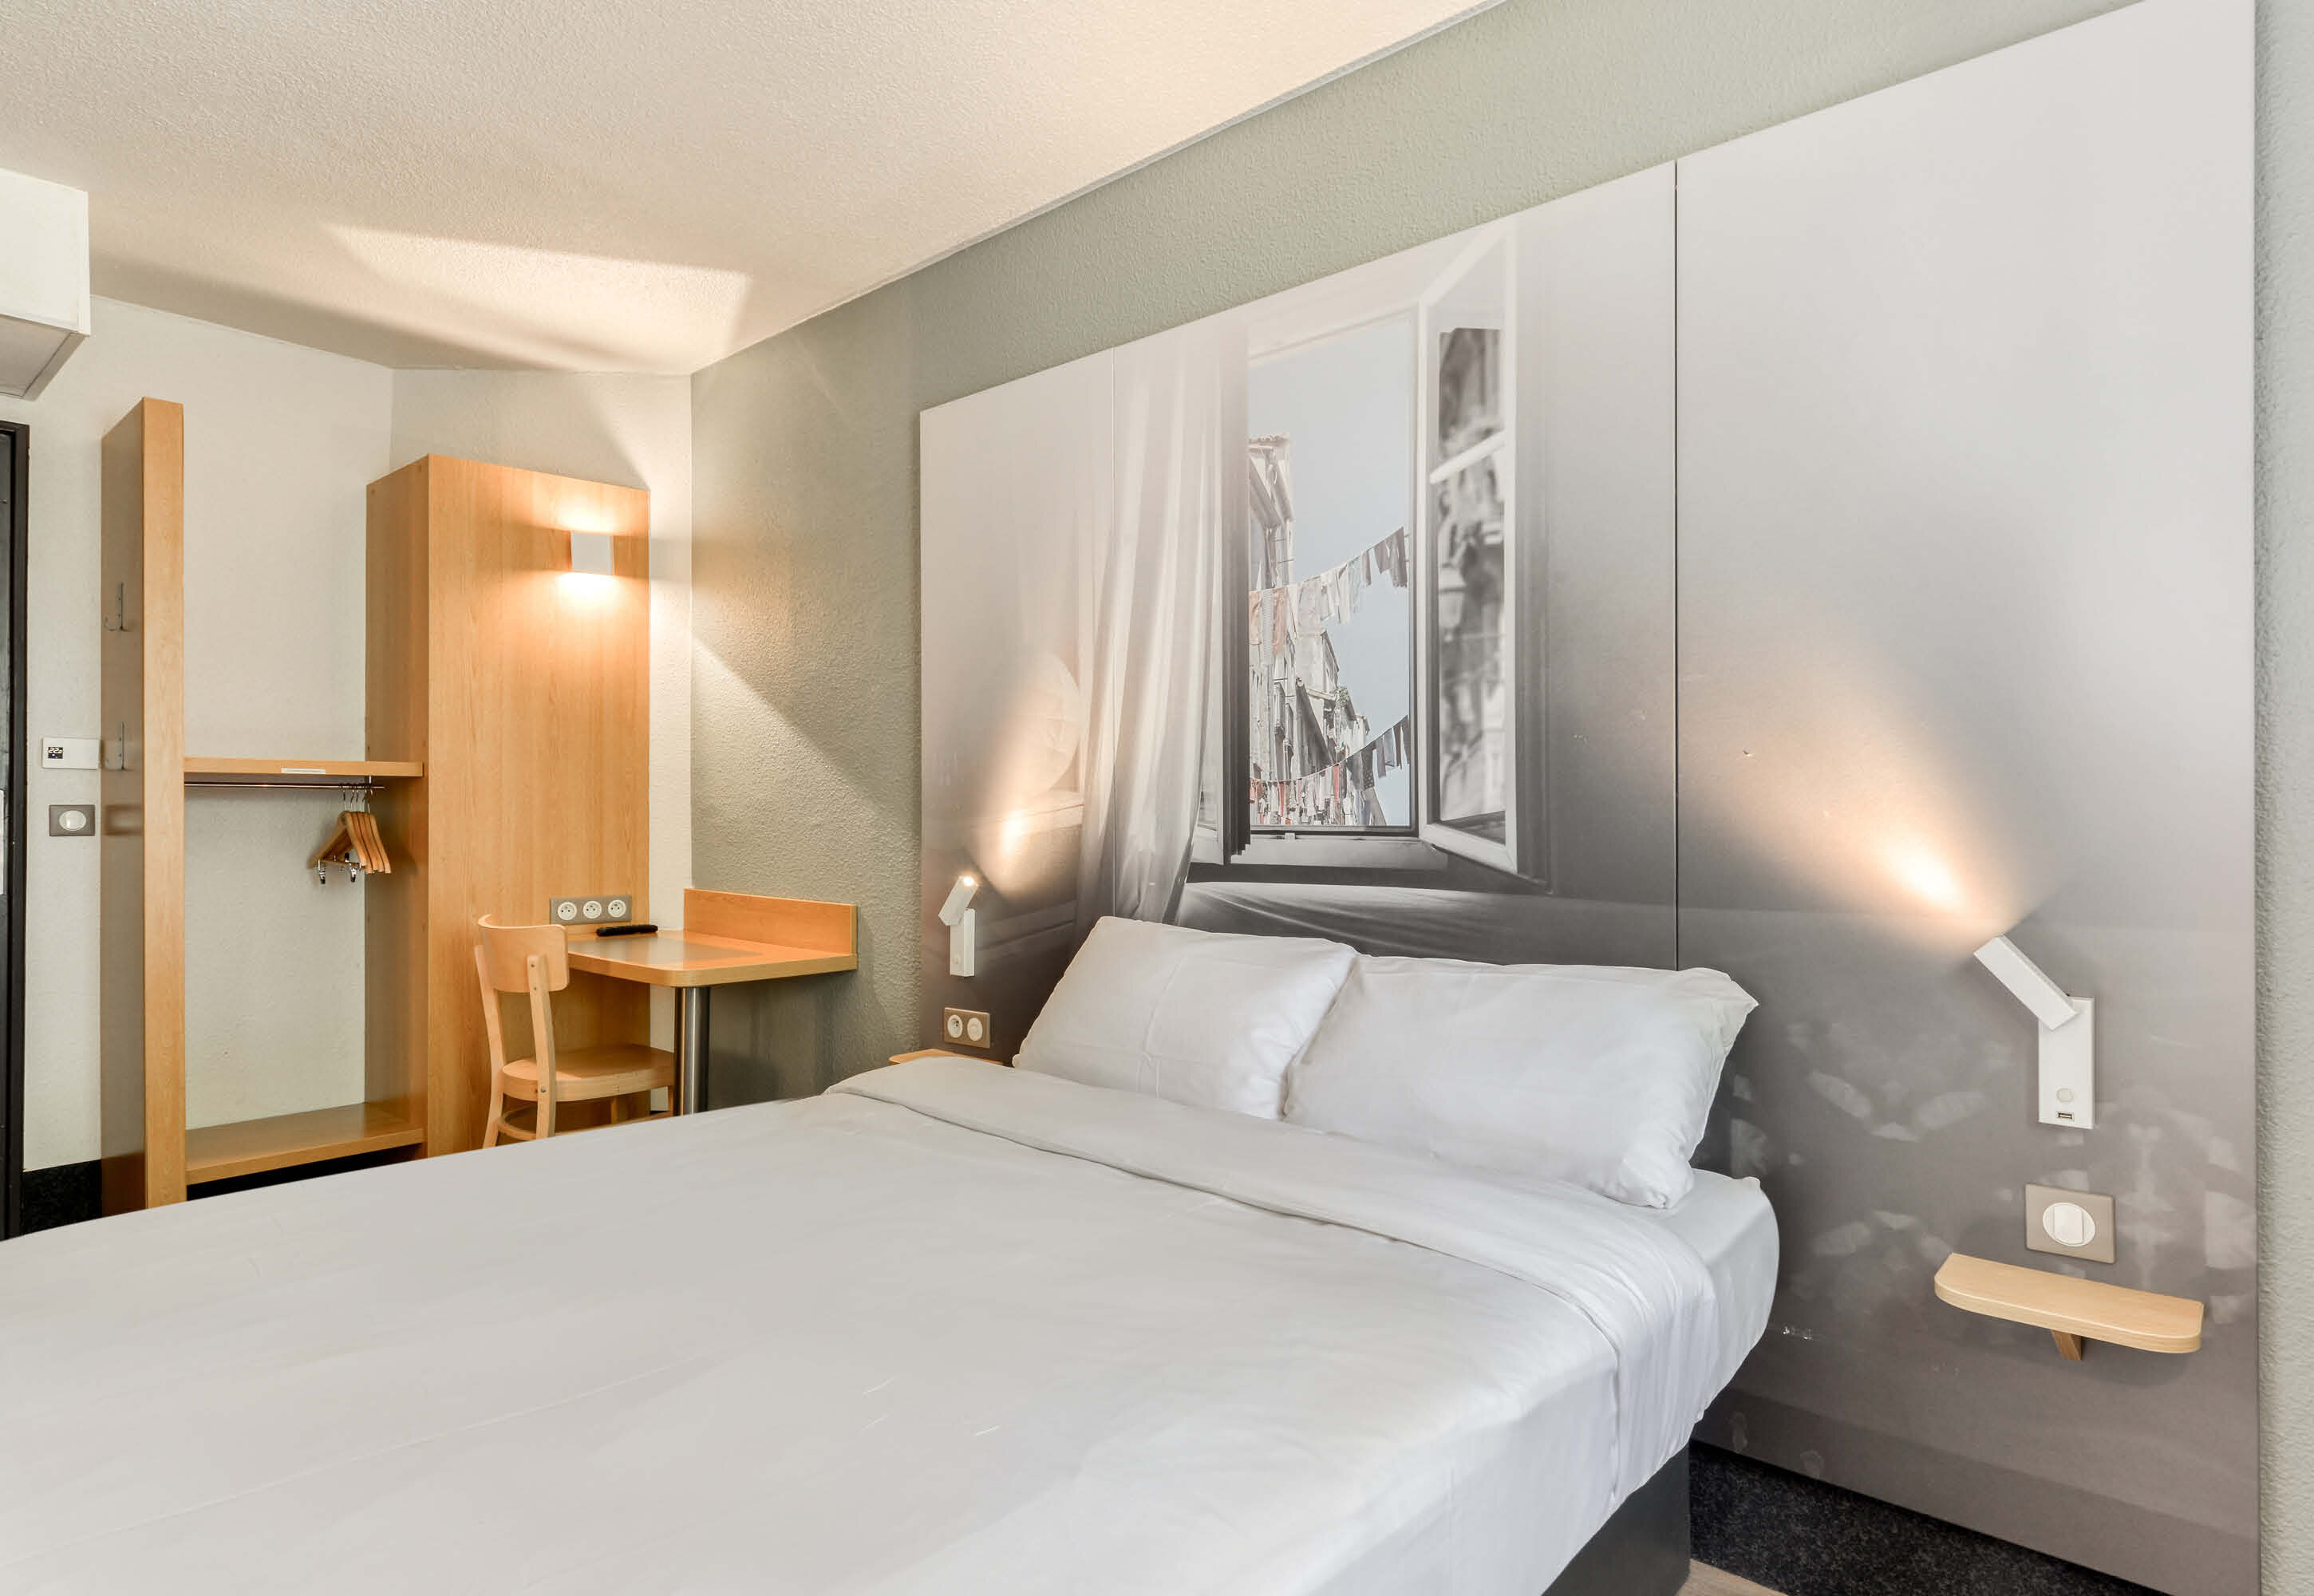 Images B&B HOTEL Montpellier 1